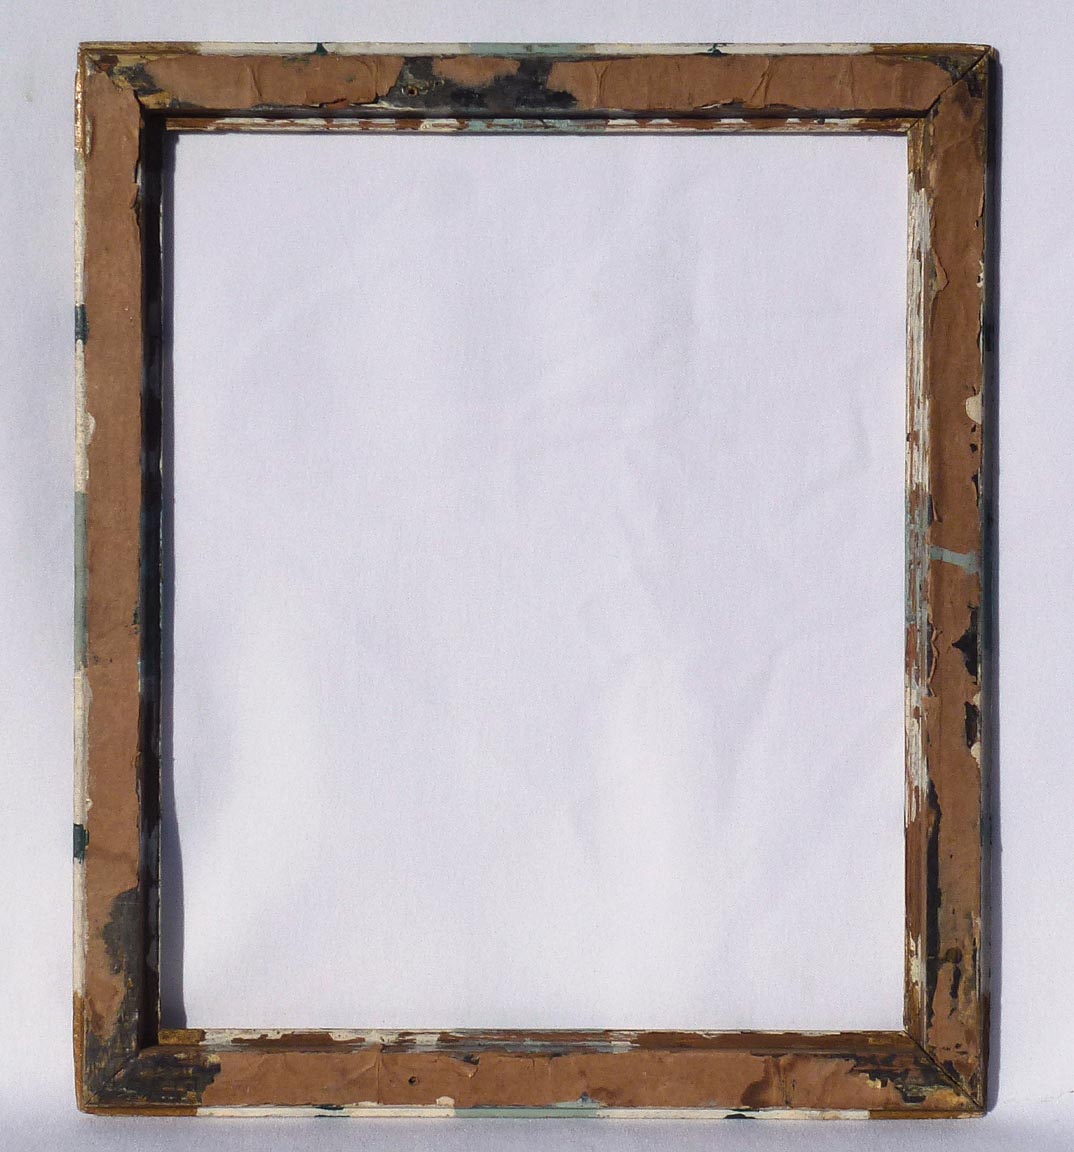 Painted frame